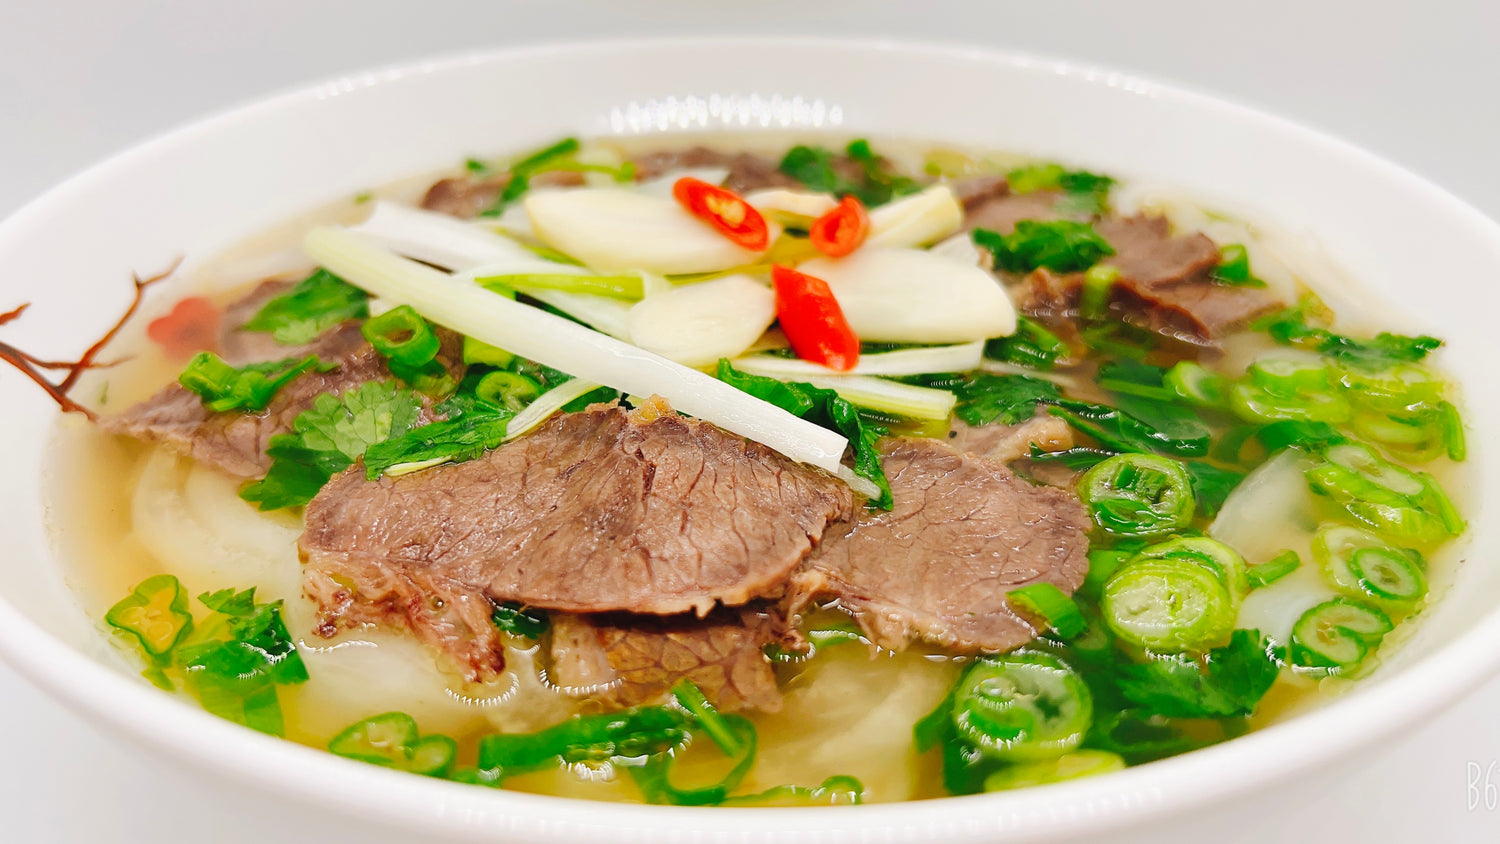 A special and delicious Hanoi Style Beef Pho cooked by T-ZO located in Lorton, Fairfax County, Virginia. This is one of the most famous dishes of Vietnamese Cuisine